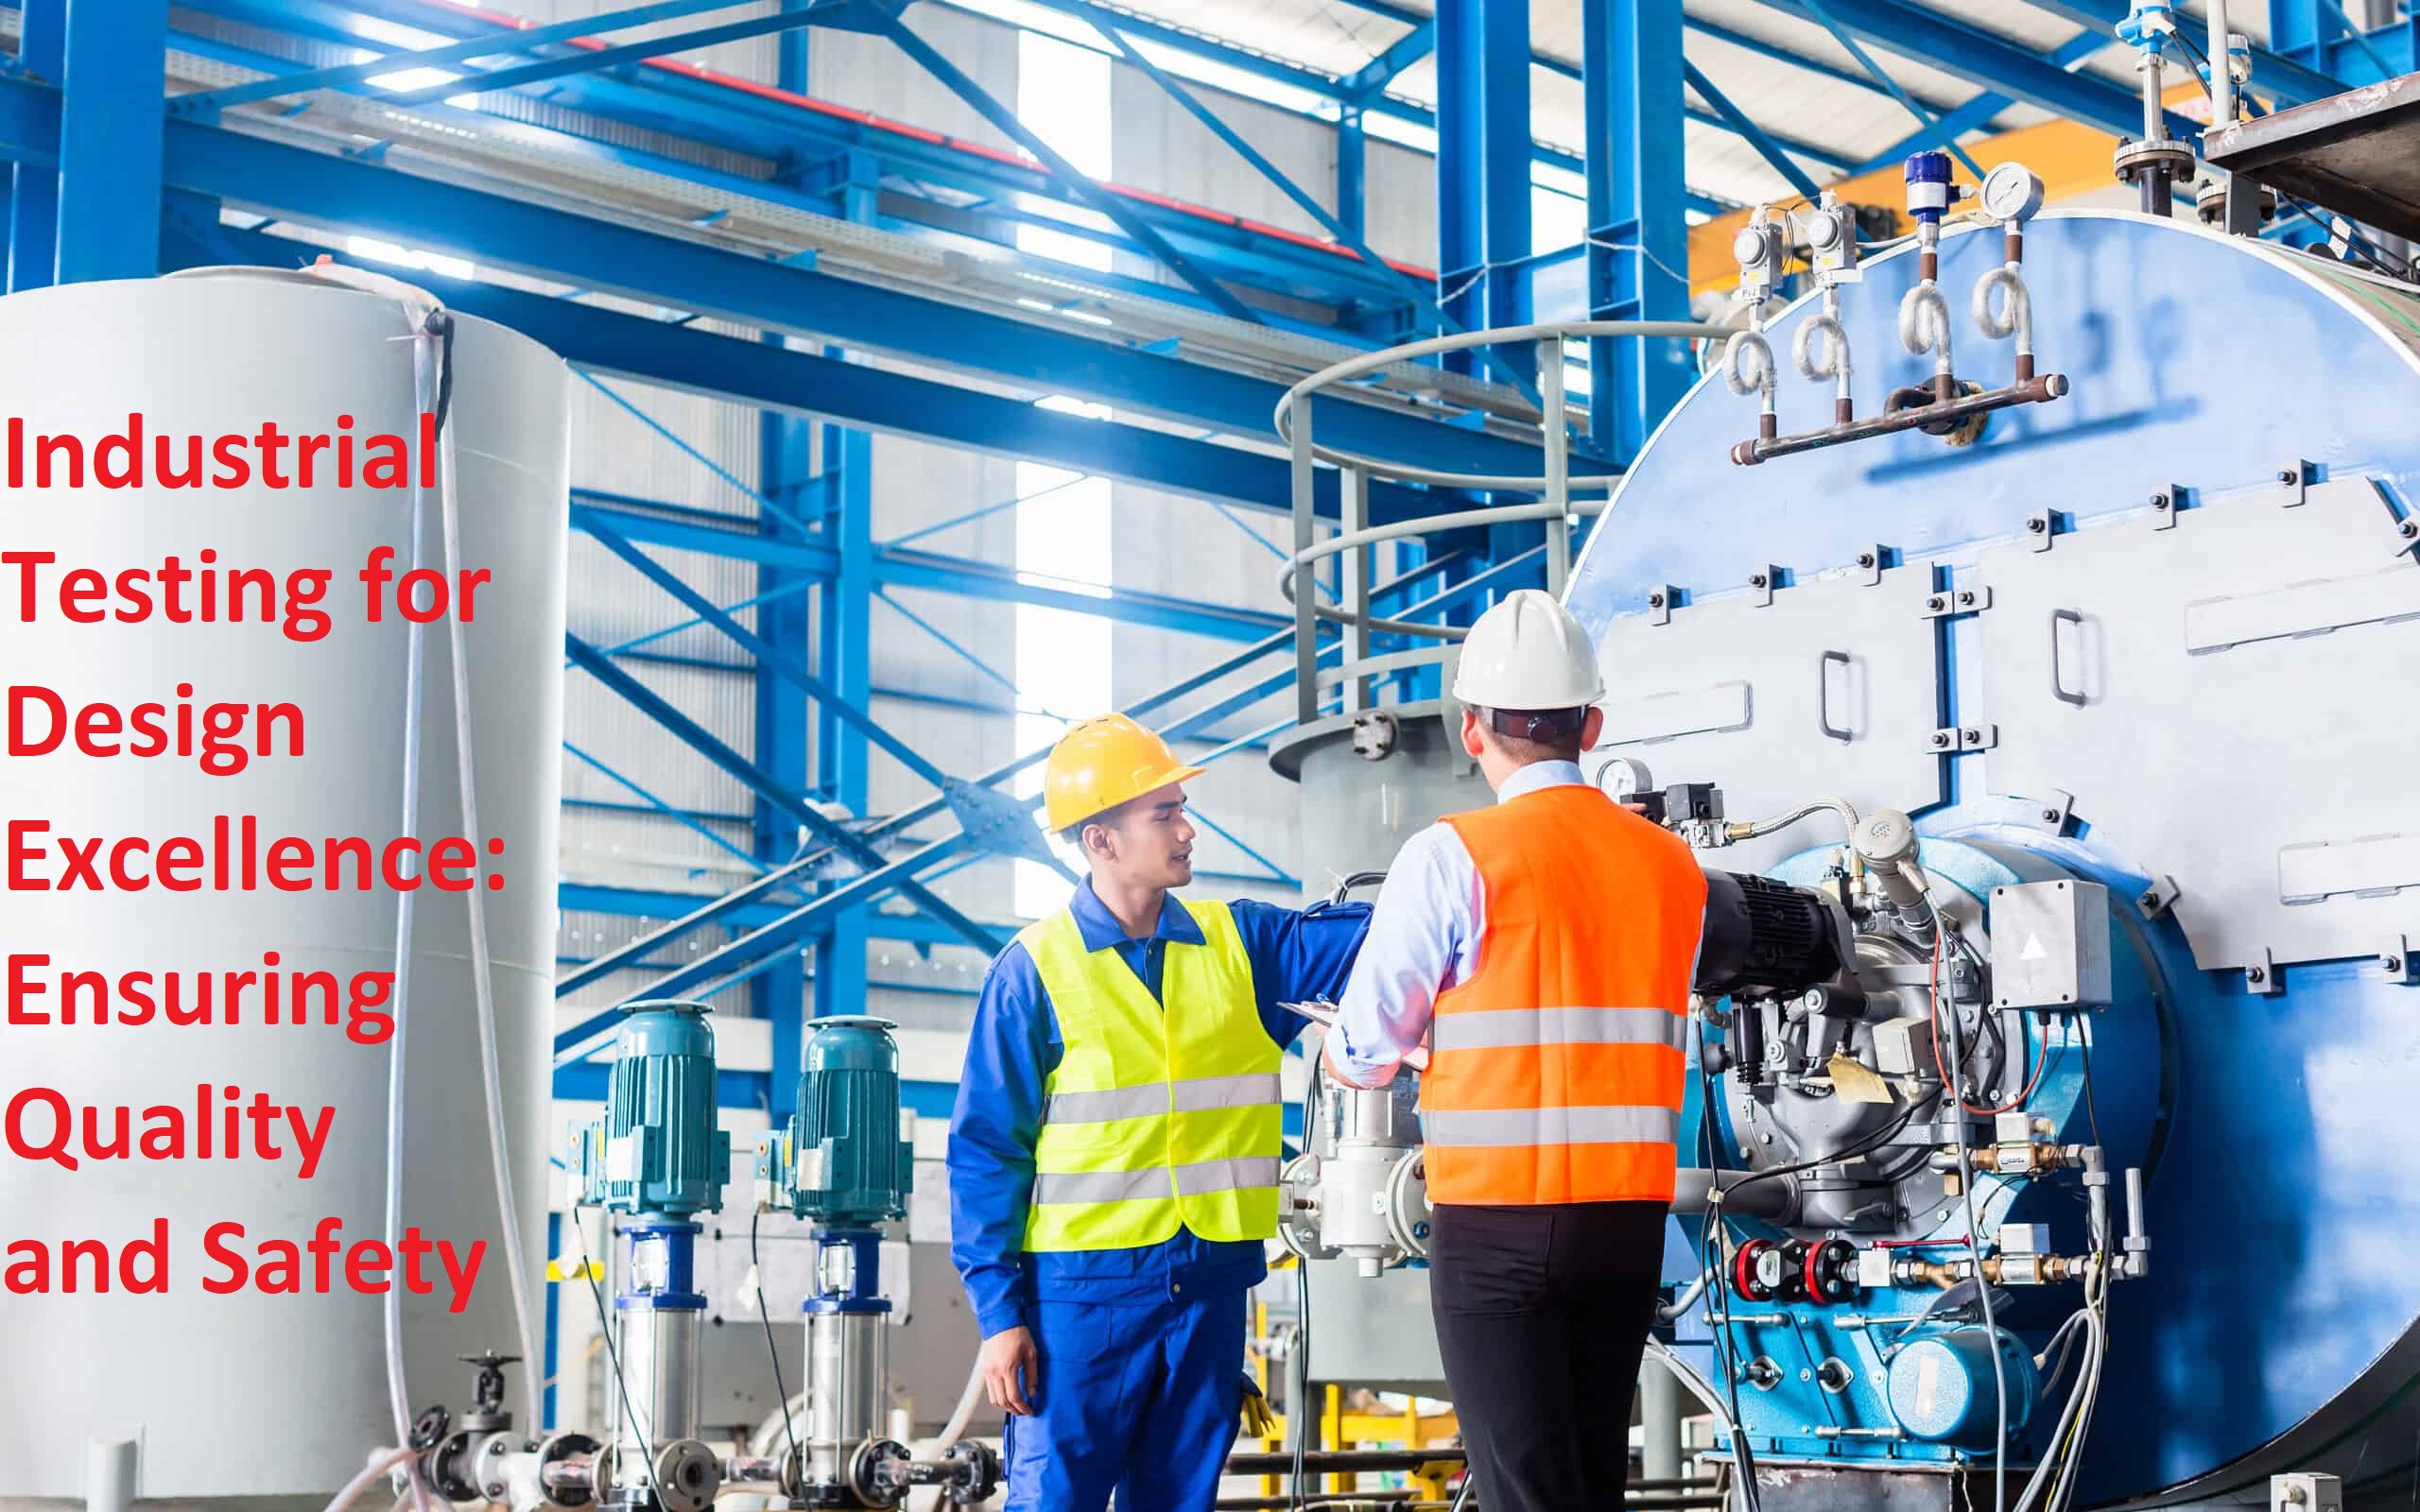 Industrial Testing for Design Excellence: Ensuring Quality and Safety